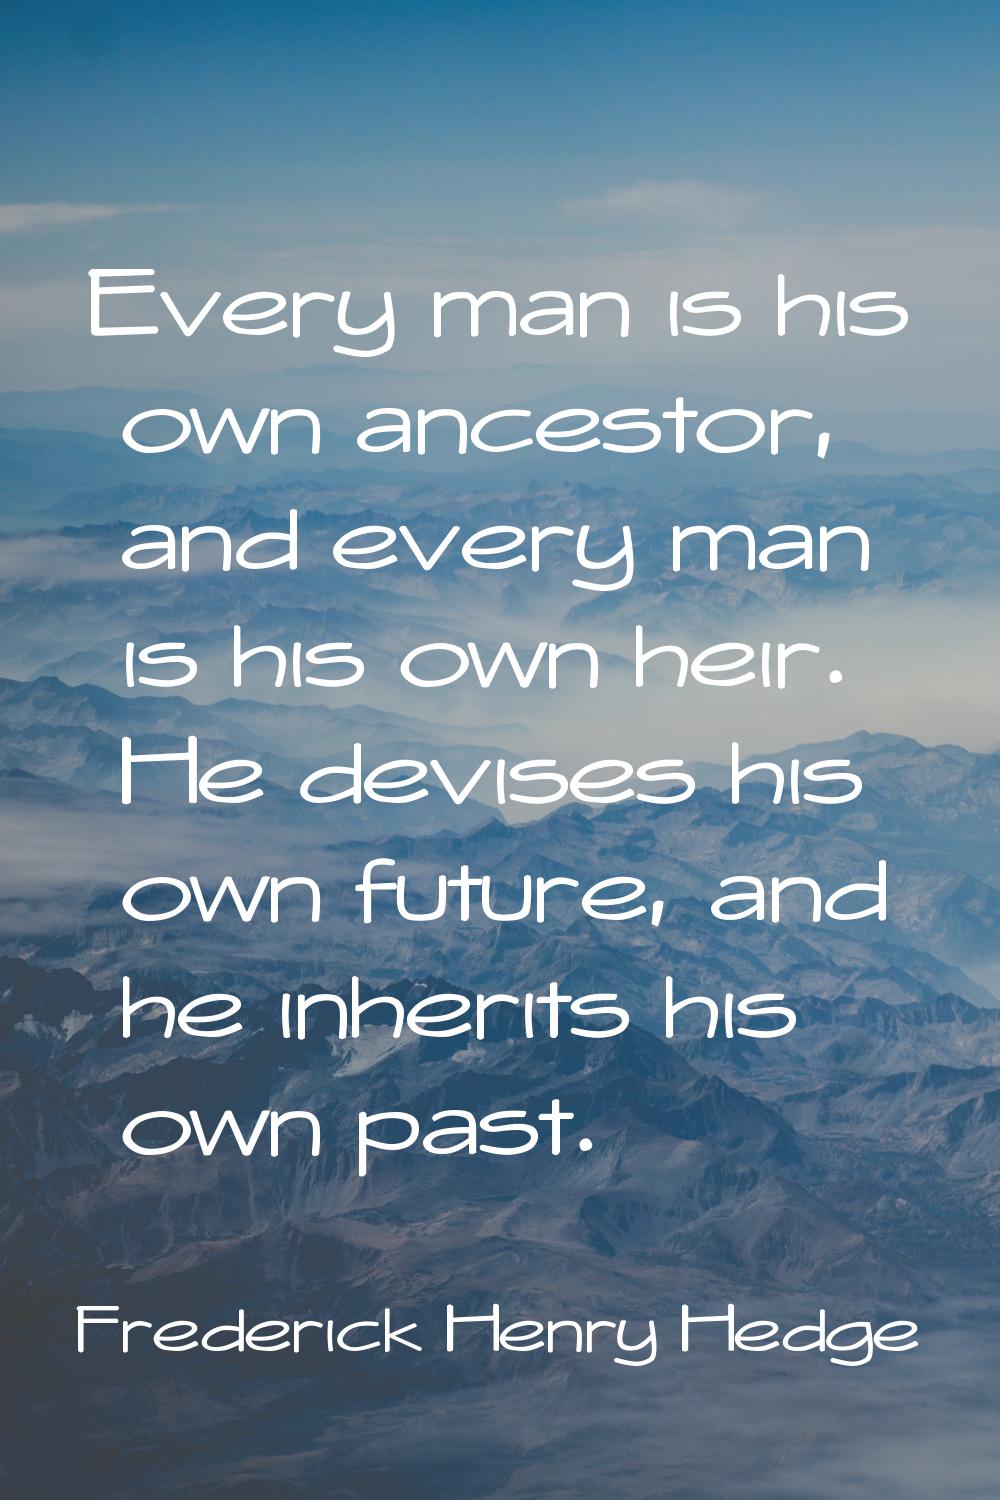 Every man is his own ancestor, and every man is his own heir. He devises his own future, and he inh